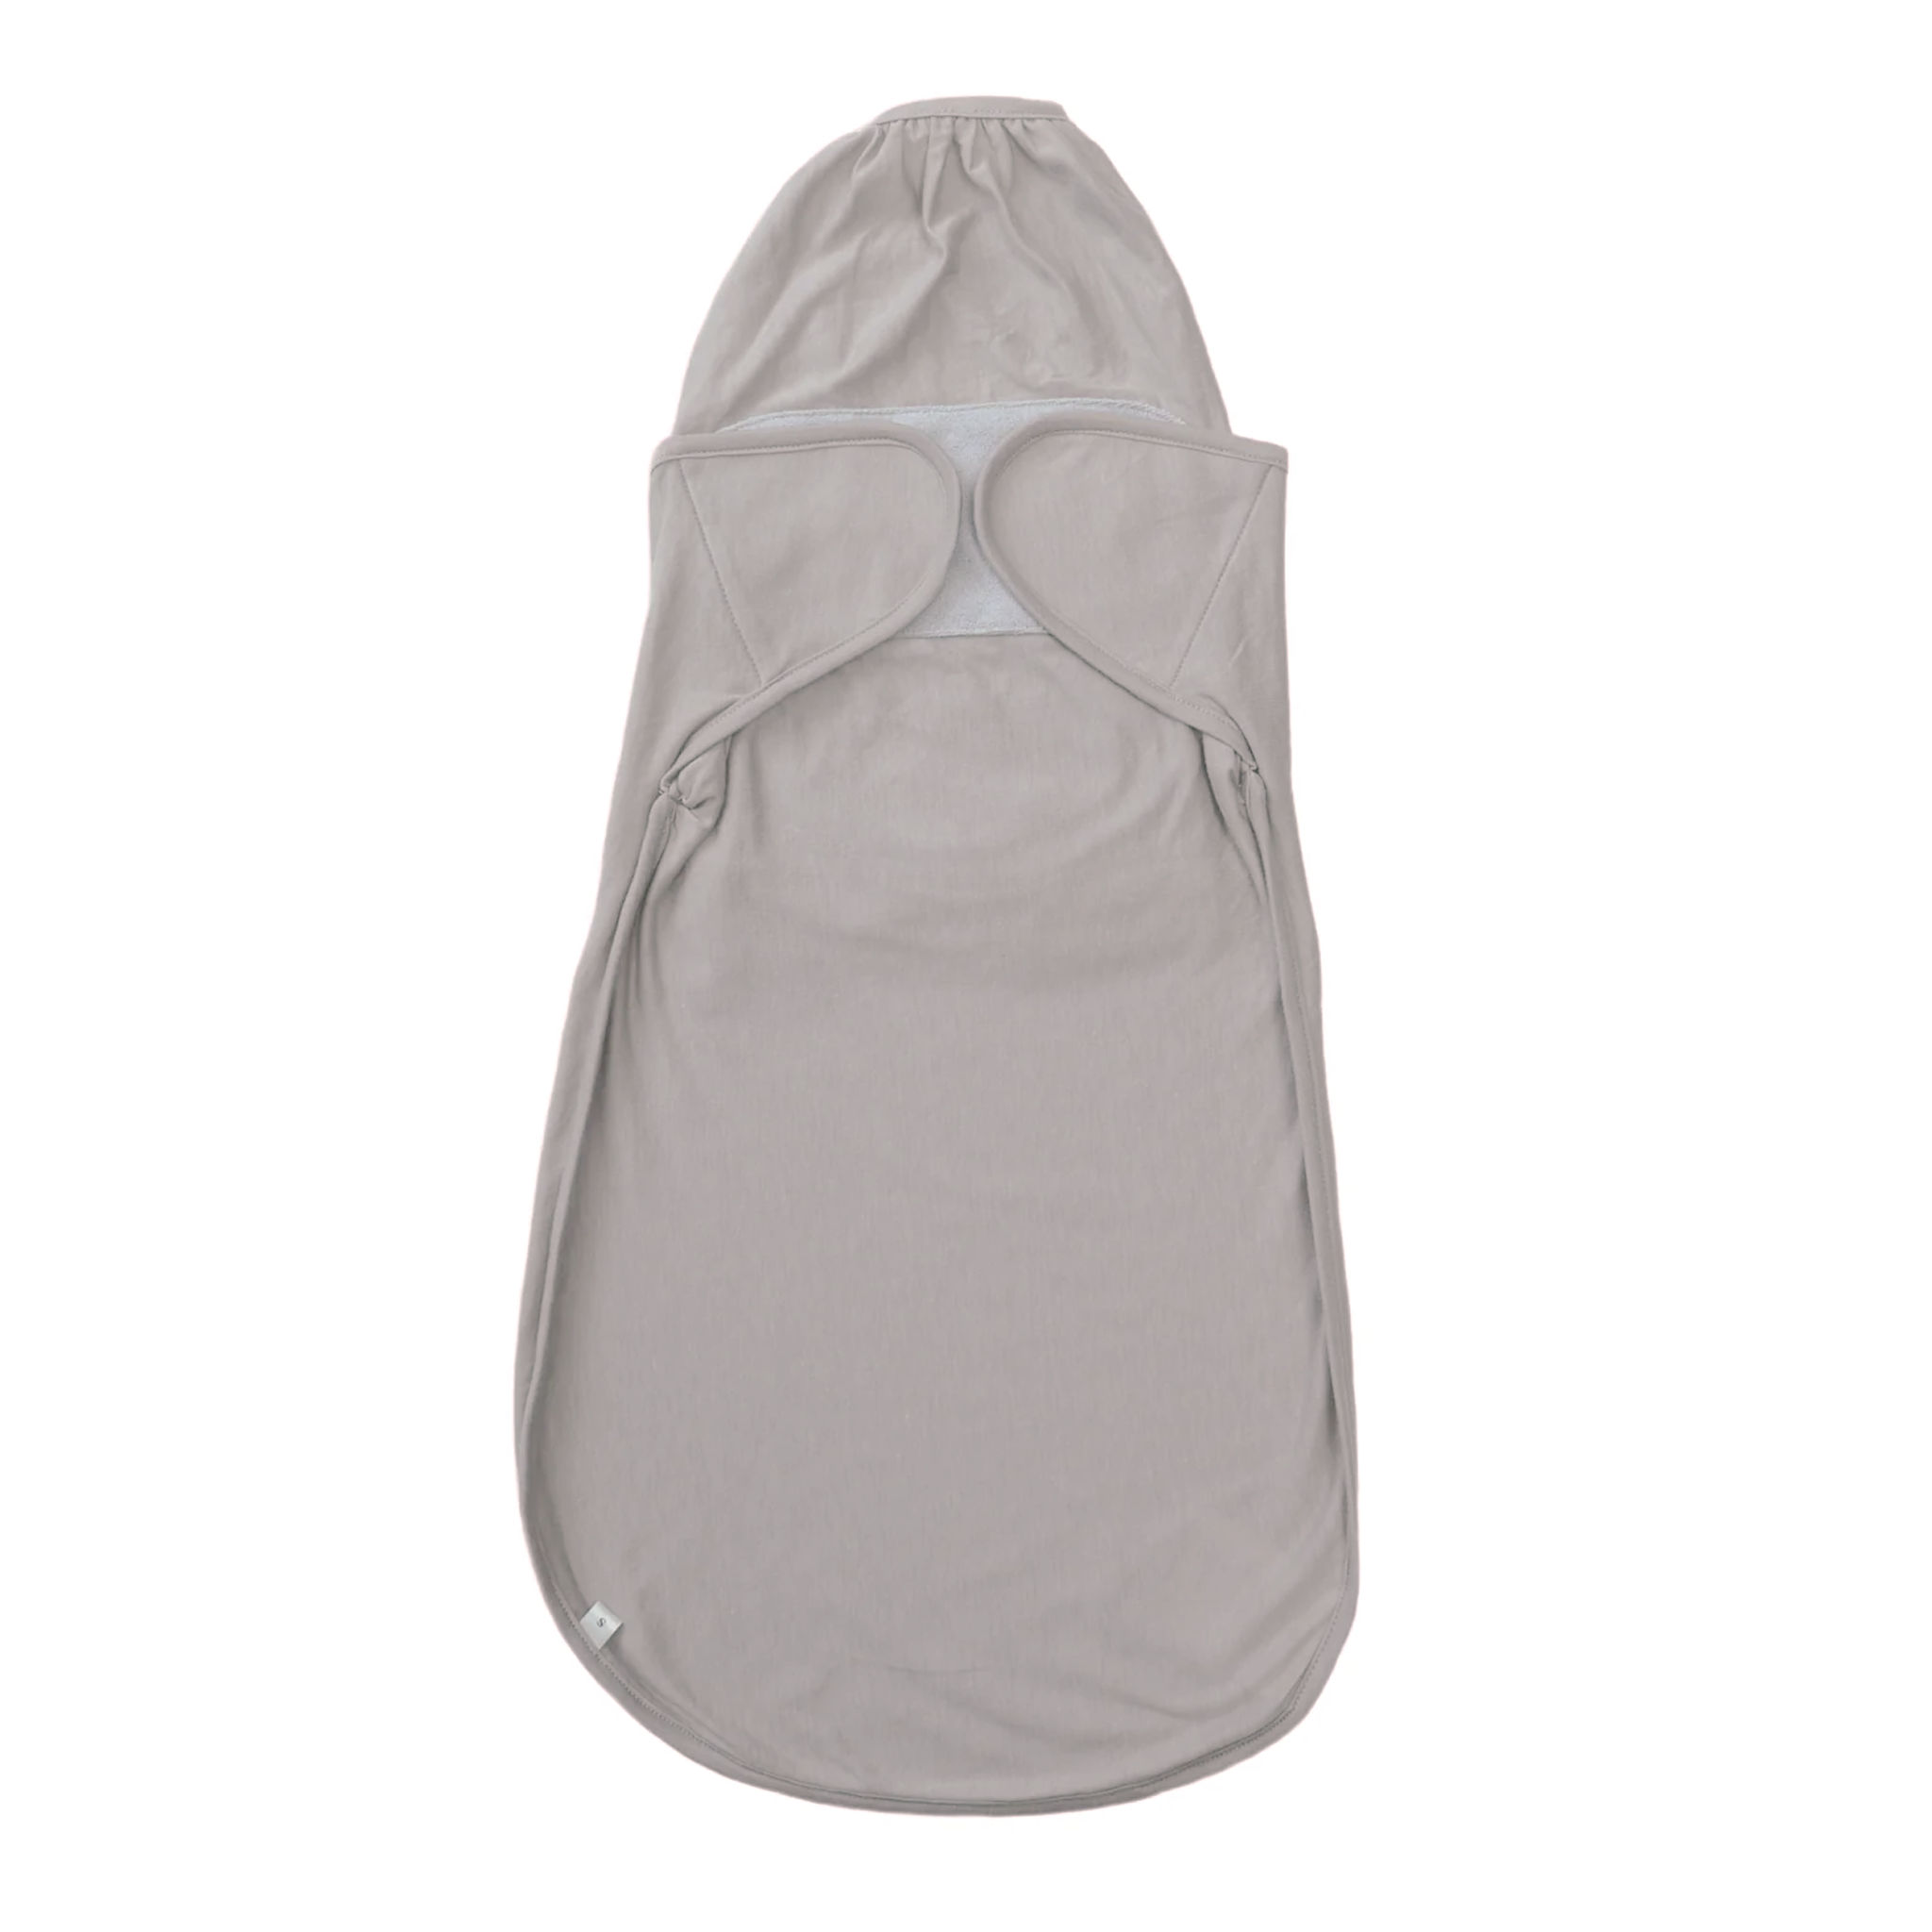 Swaddle Breathable Bamboo, Cool Gray